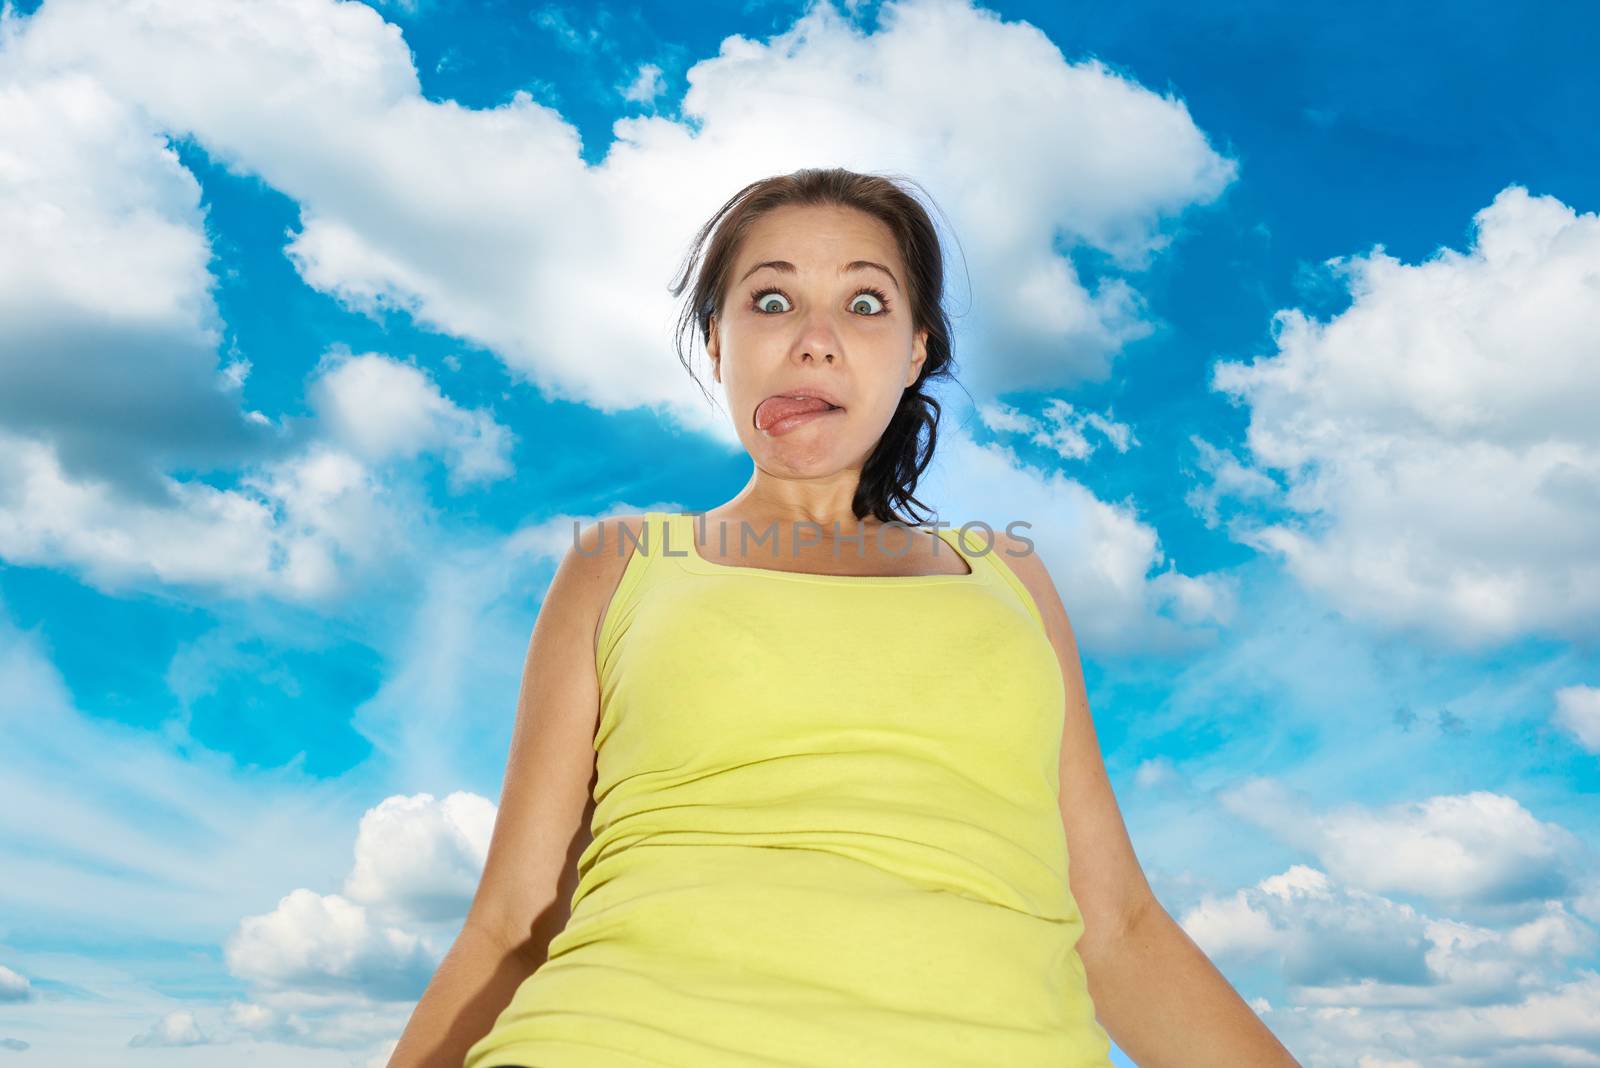 Pretty young girl with funny face expression over blue sky with clouds